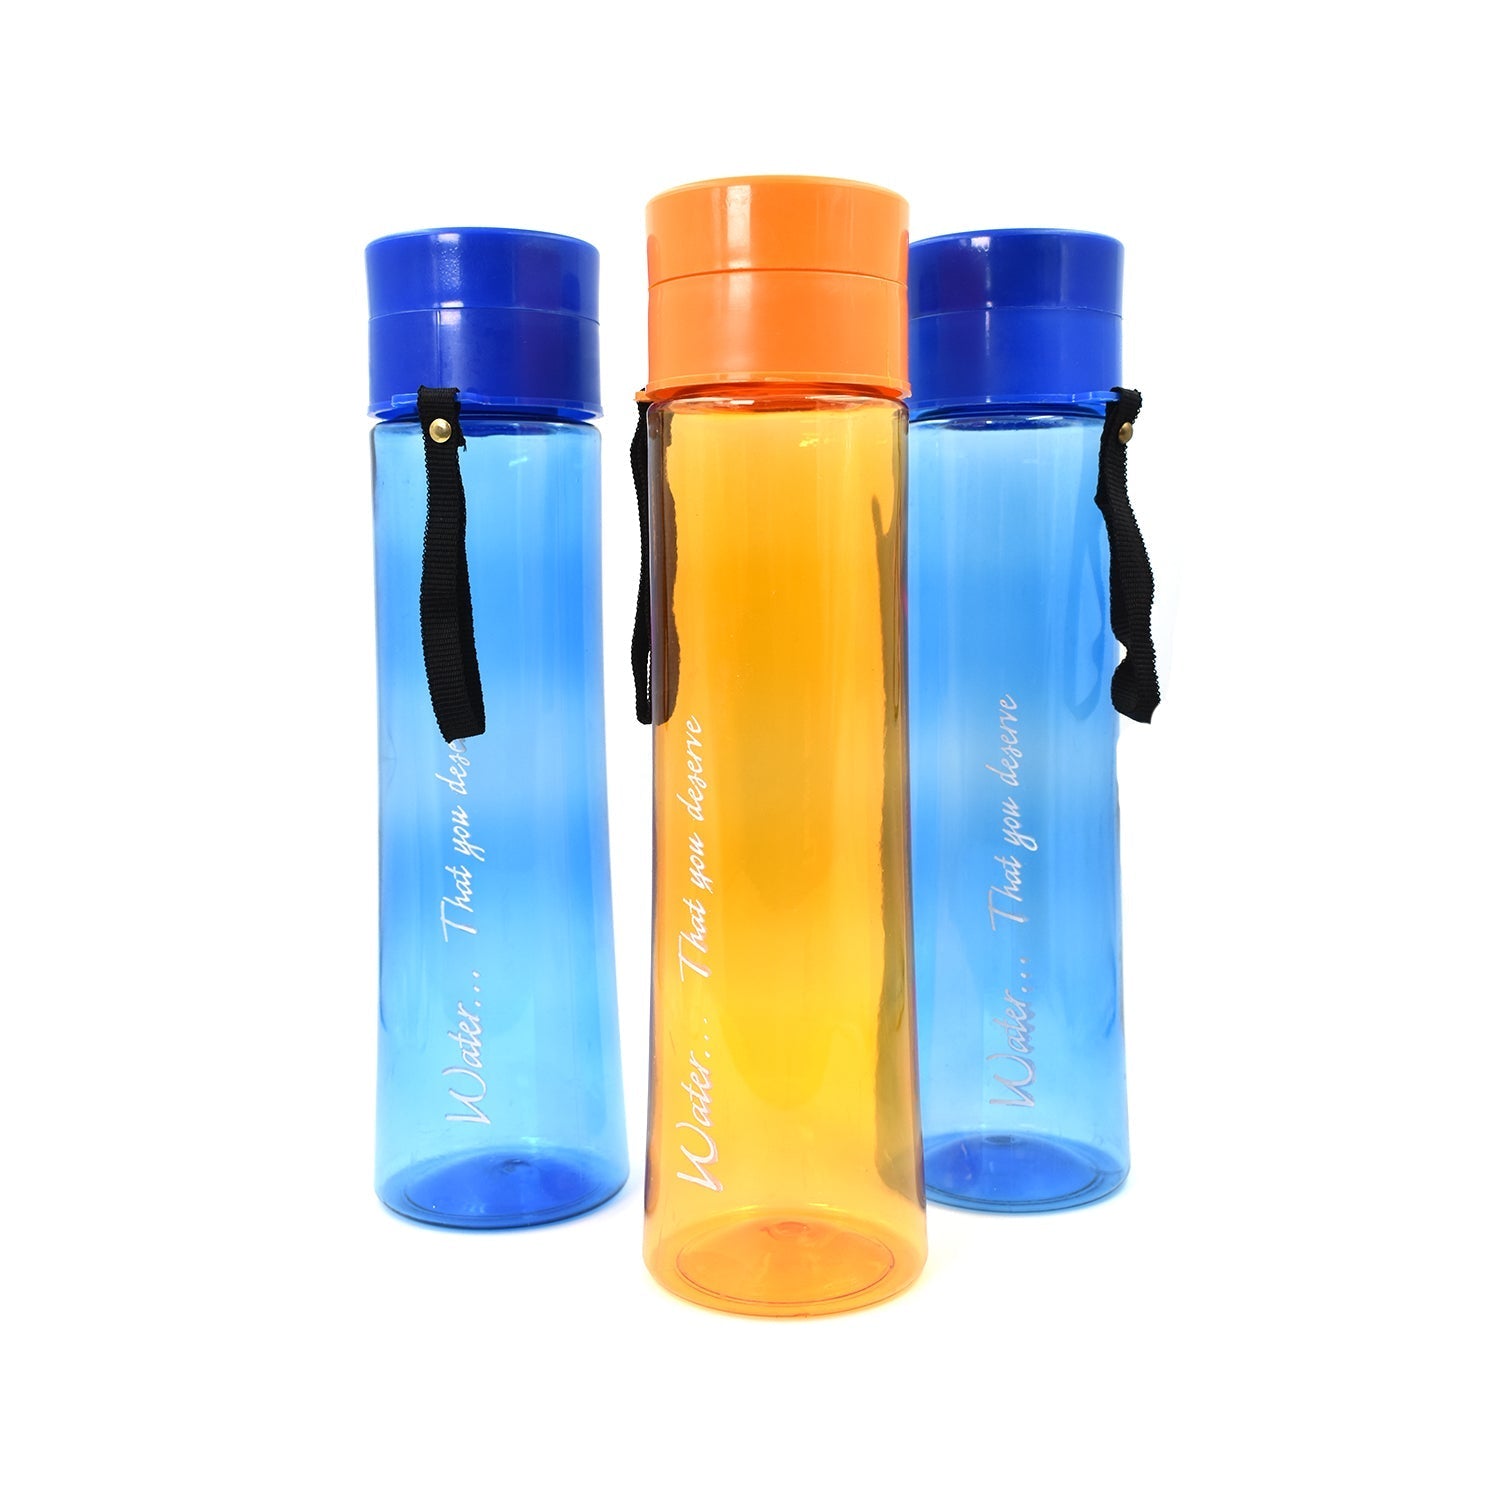 2716 Unbreakable, Leakproof, Durable, BPA Free, Non-Toxic Plastic Water Bottles, 1 Litre (Pack of 3, Assorted Color) DeoDap